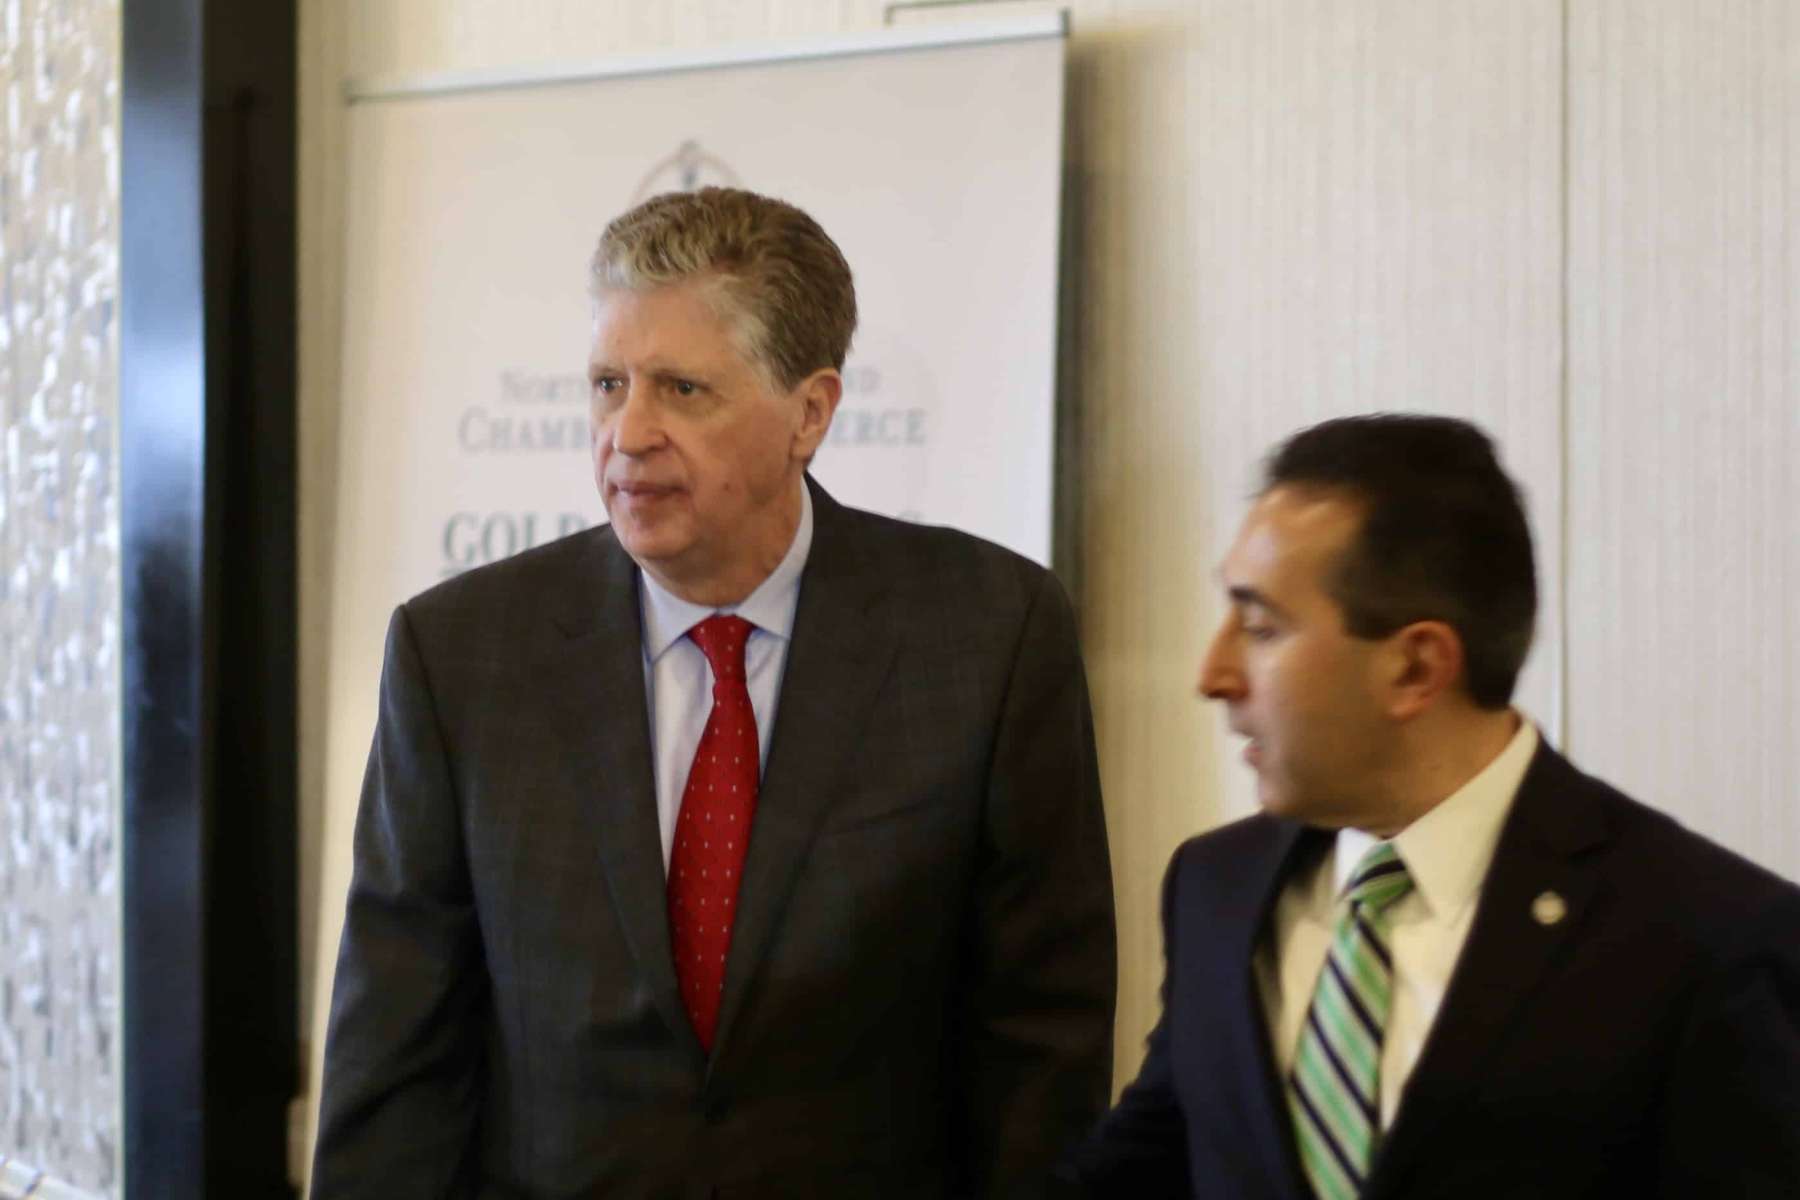 Governor McKee boasts about tax breaks for businesses at Chamber breakfast